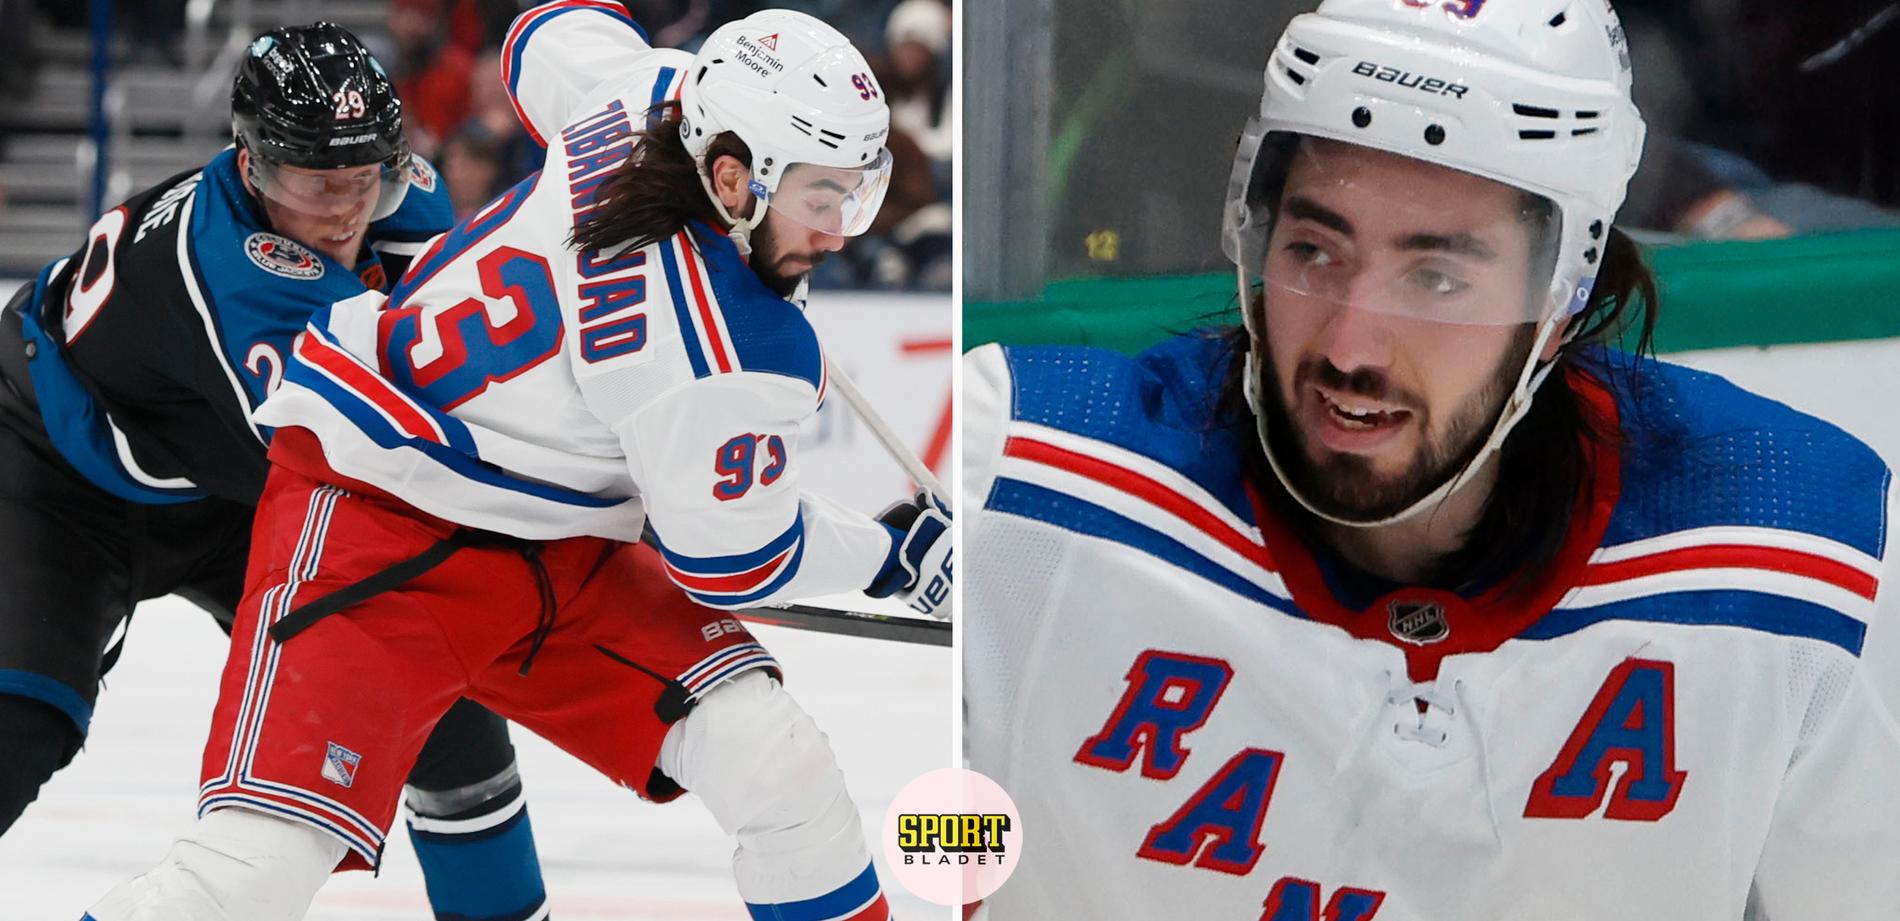 New York Rangers vs San Jose Sharks Game Recap: Rangers Return to Top of NHL Table After Victory